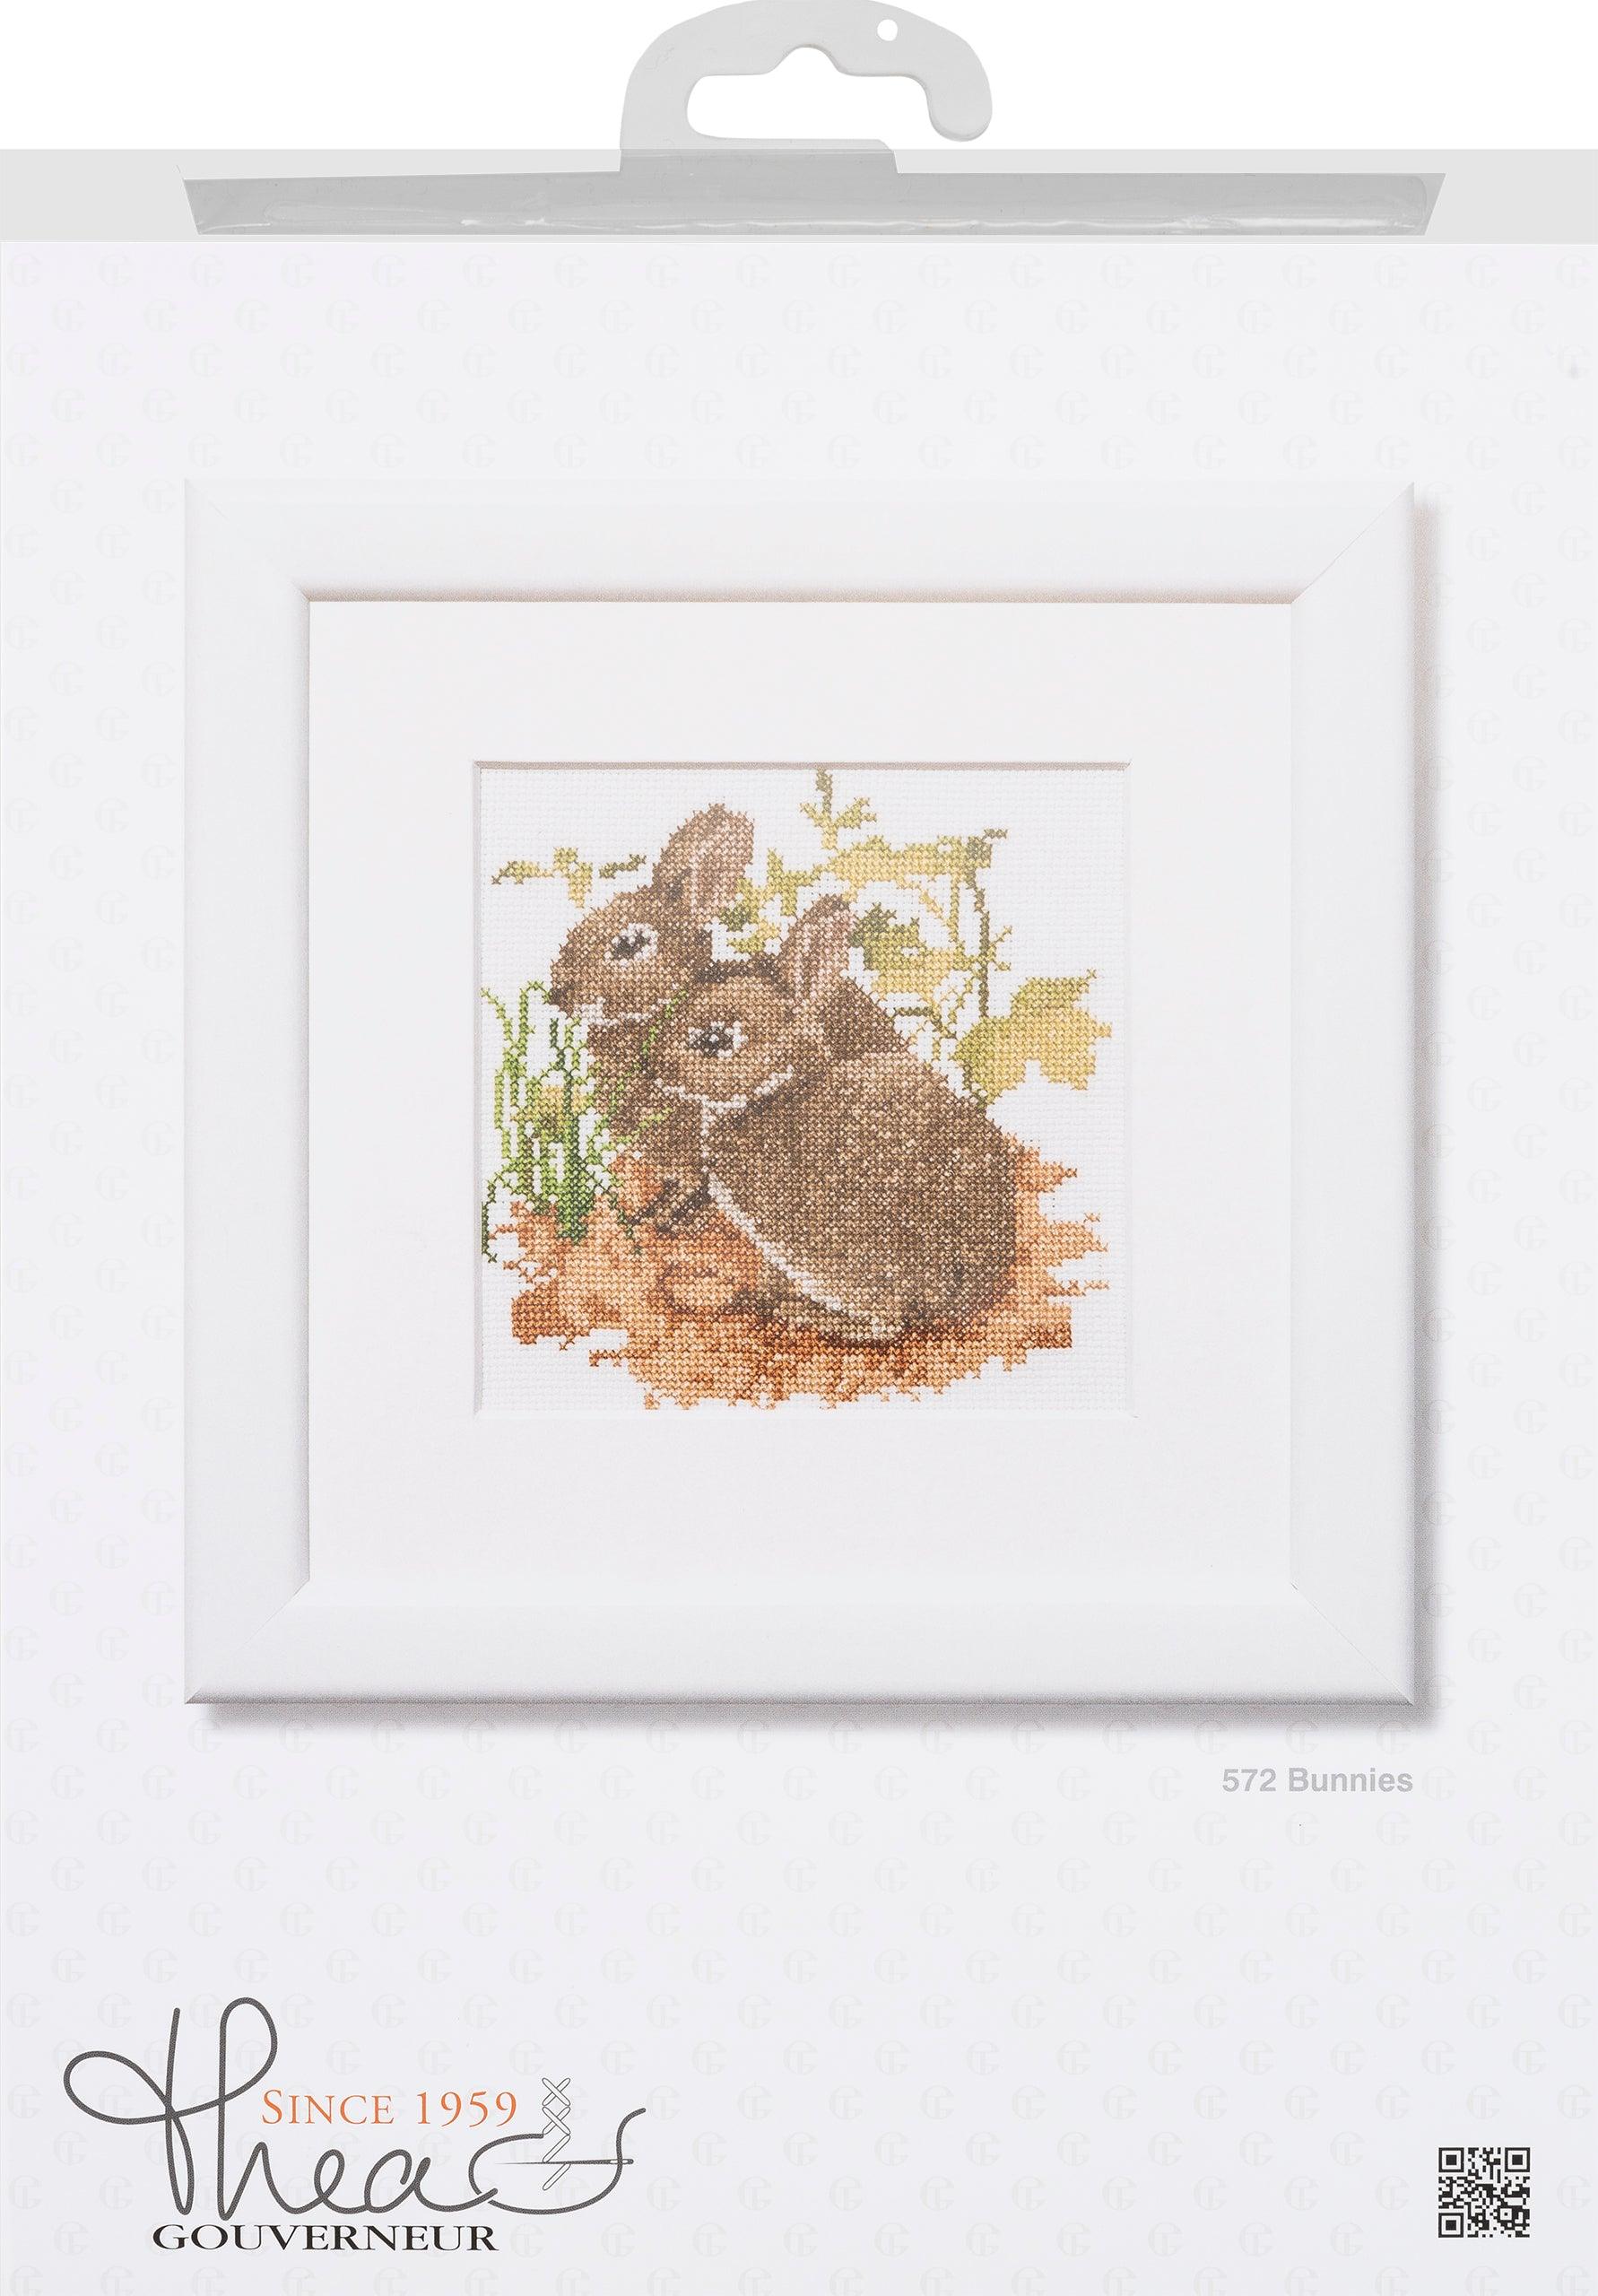 Thea Gouverneur - Counted Cross Stitch Kit - Bunnies - Aida - 14 count - 572A - Thea Gouverneur Since 1959